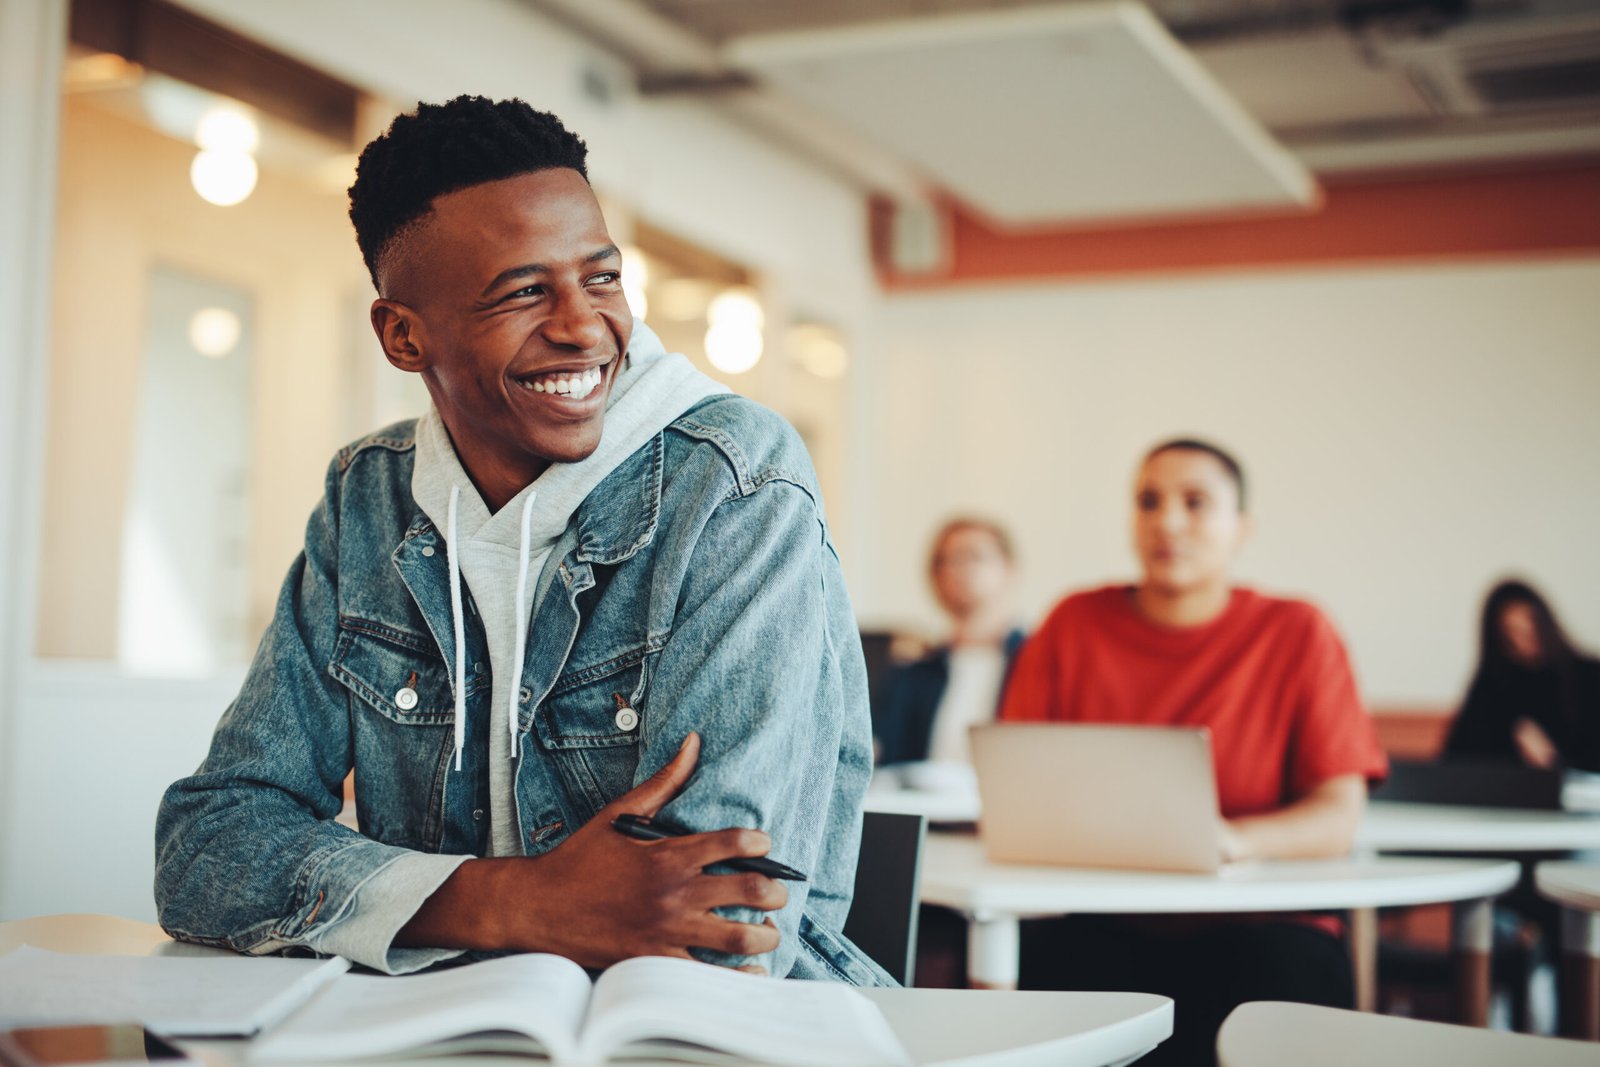 Male student sitting in university classroom looking away and smiling. Man sitting in lecture in high school classroom a picture of positive mental health and wellness - Light Side Wellness Co.